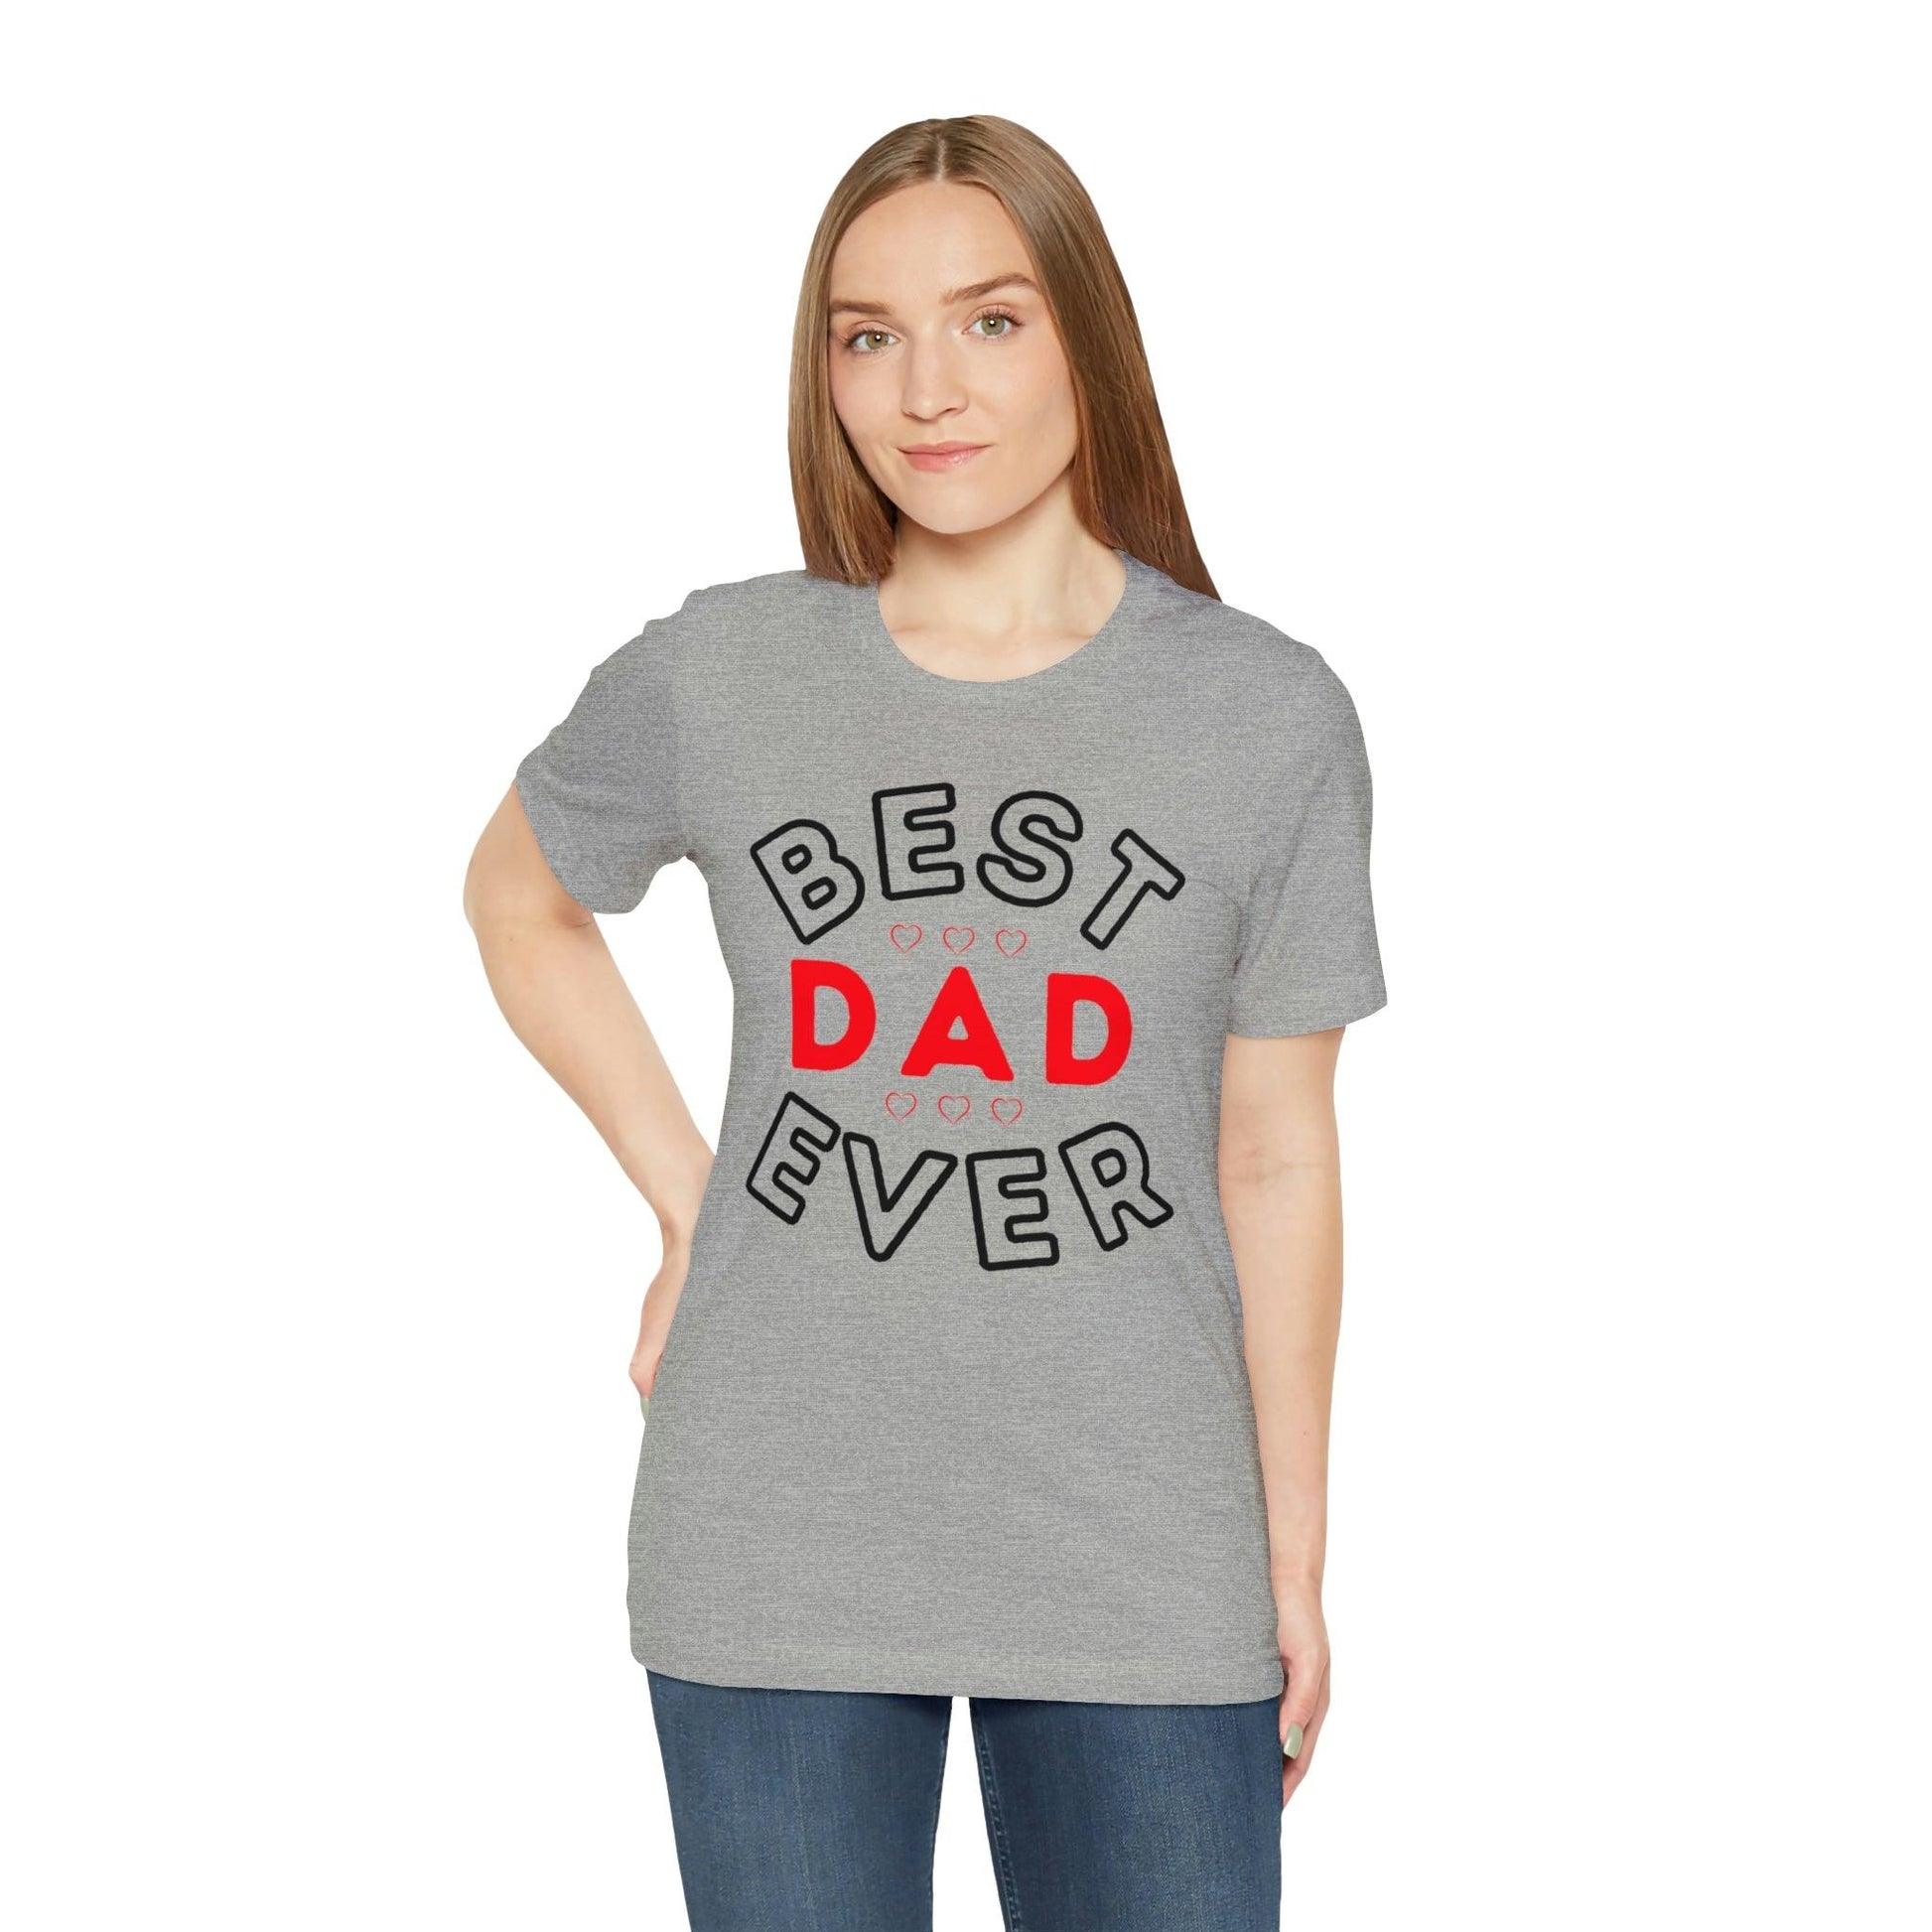 Dad Gift - Best Dad Gift - Best Super Dad Ever Shirt -Dad Shirt - Funny Fathers Gift - Husband Gift - Funny Dad Tshirt - Dad Birthday Gift - Giftsmojo